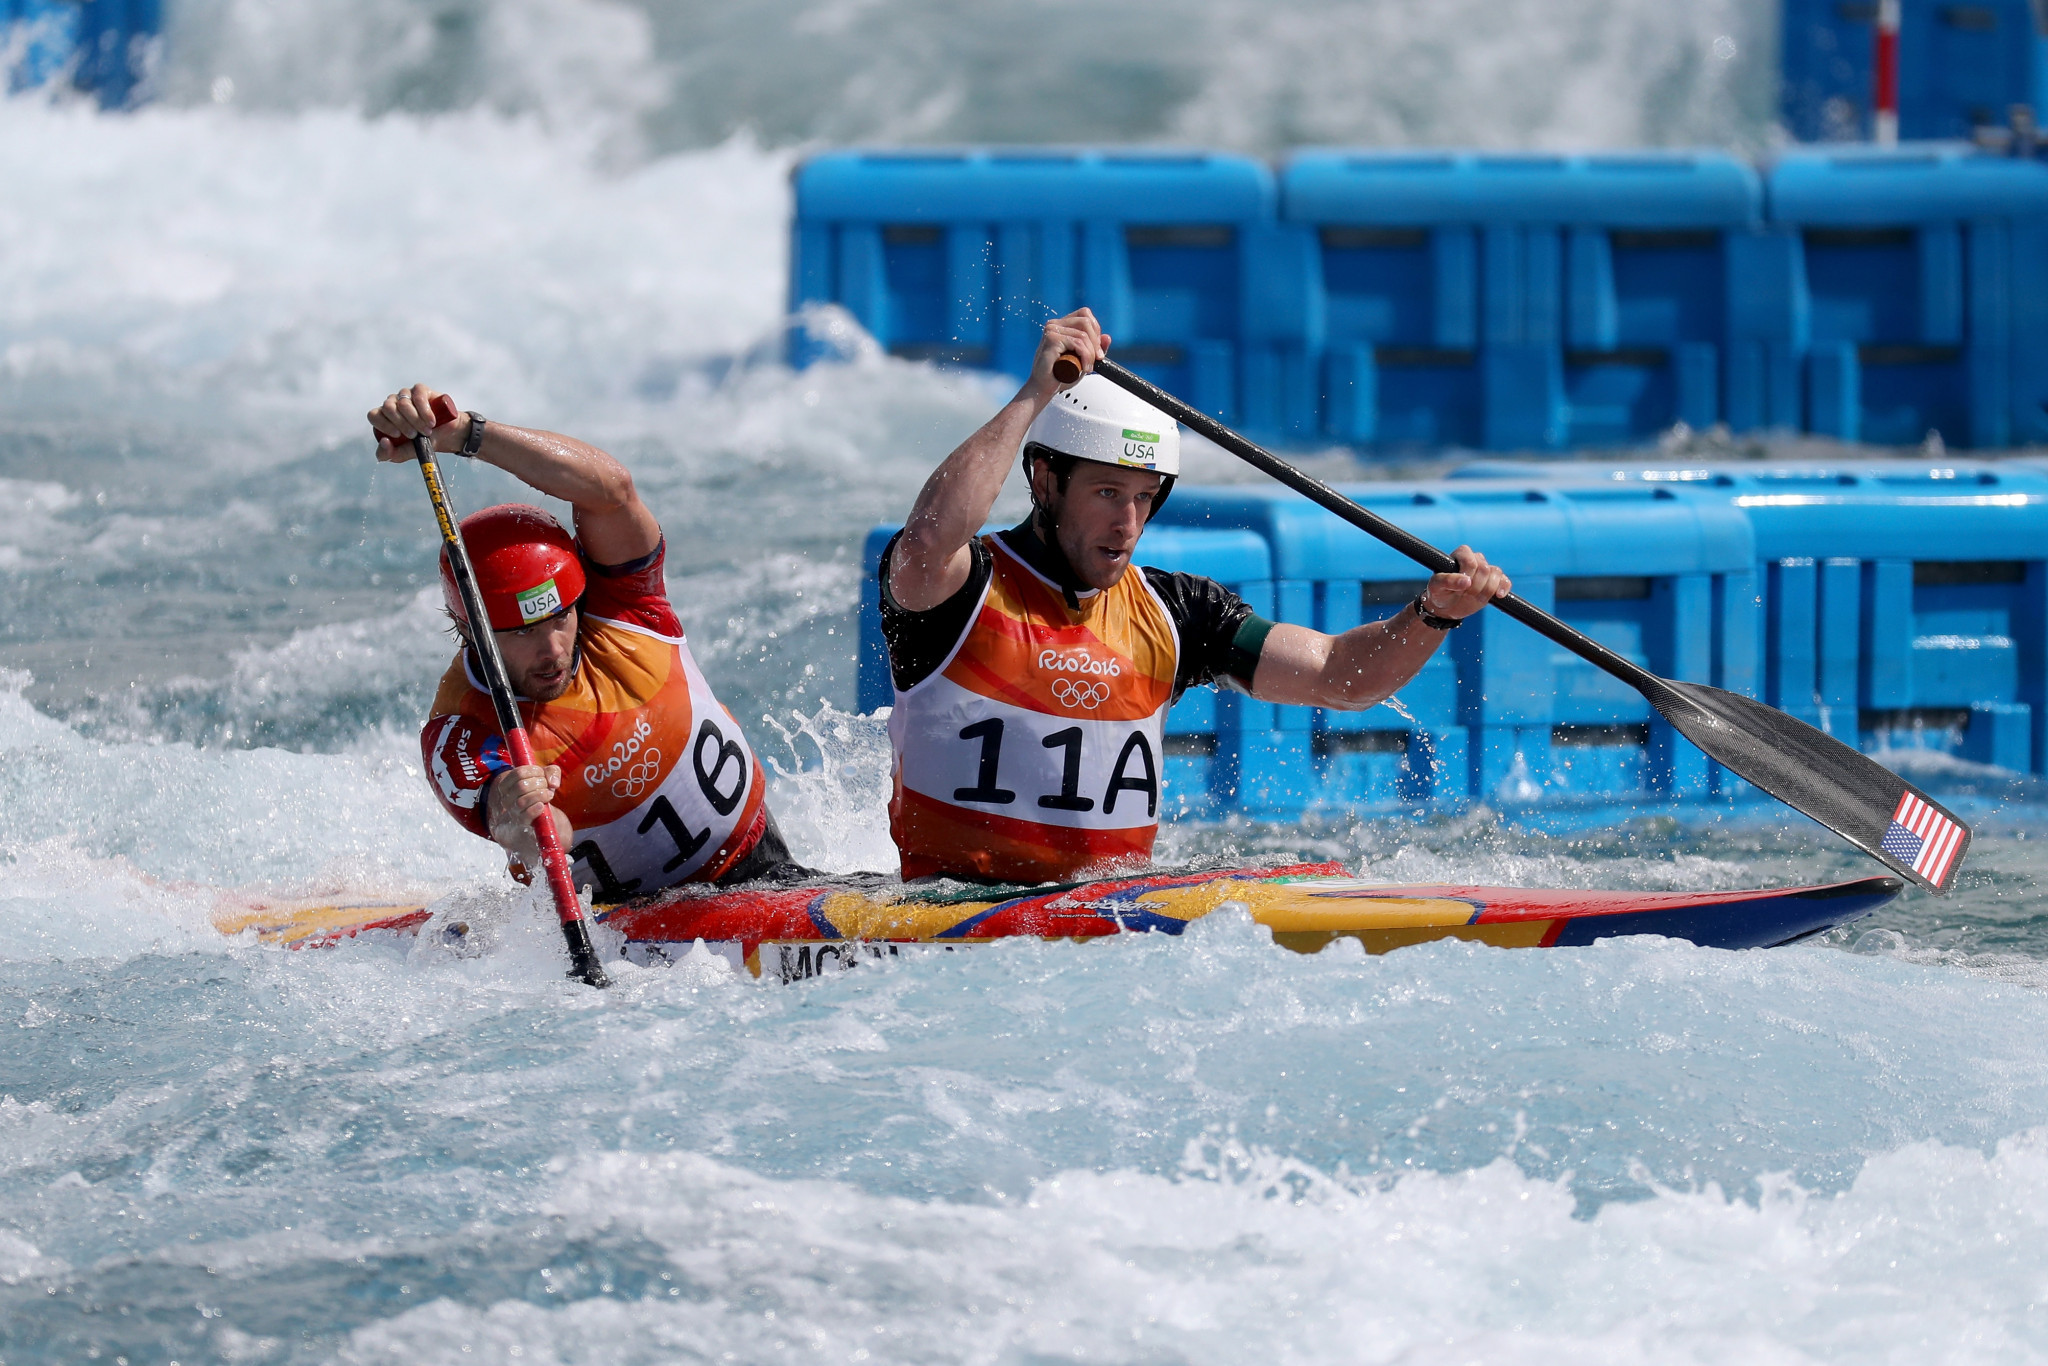  Exclusive: Rio 2016 canoe slalom site at Deodoro is first to re-open for legacy purposes